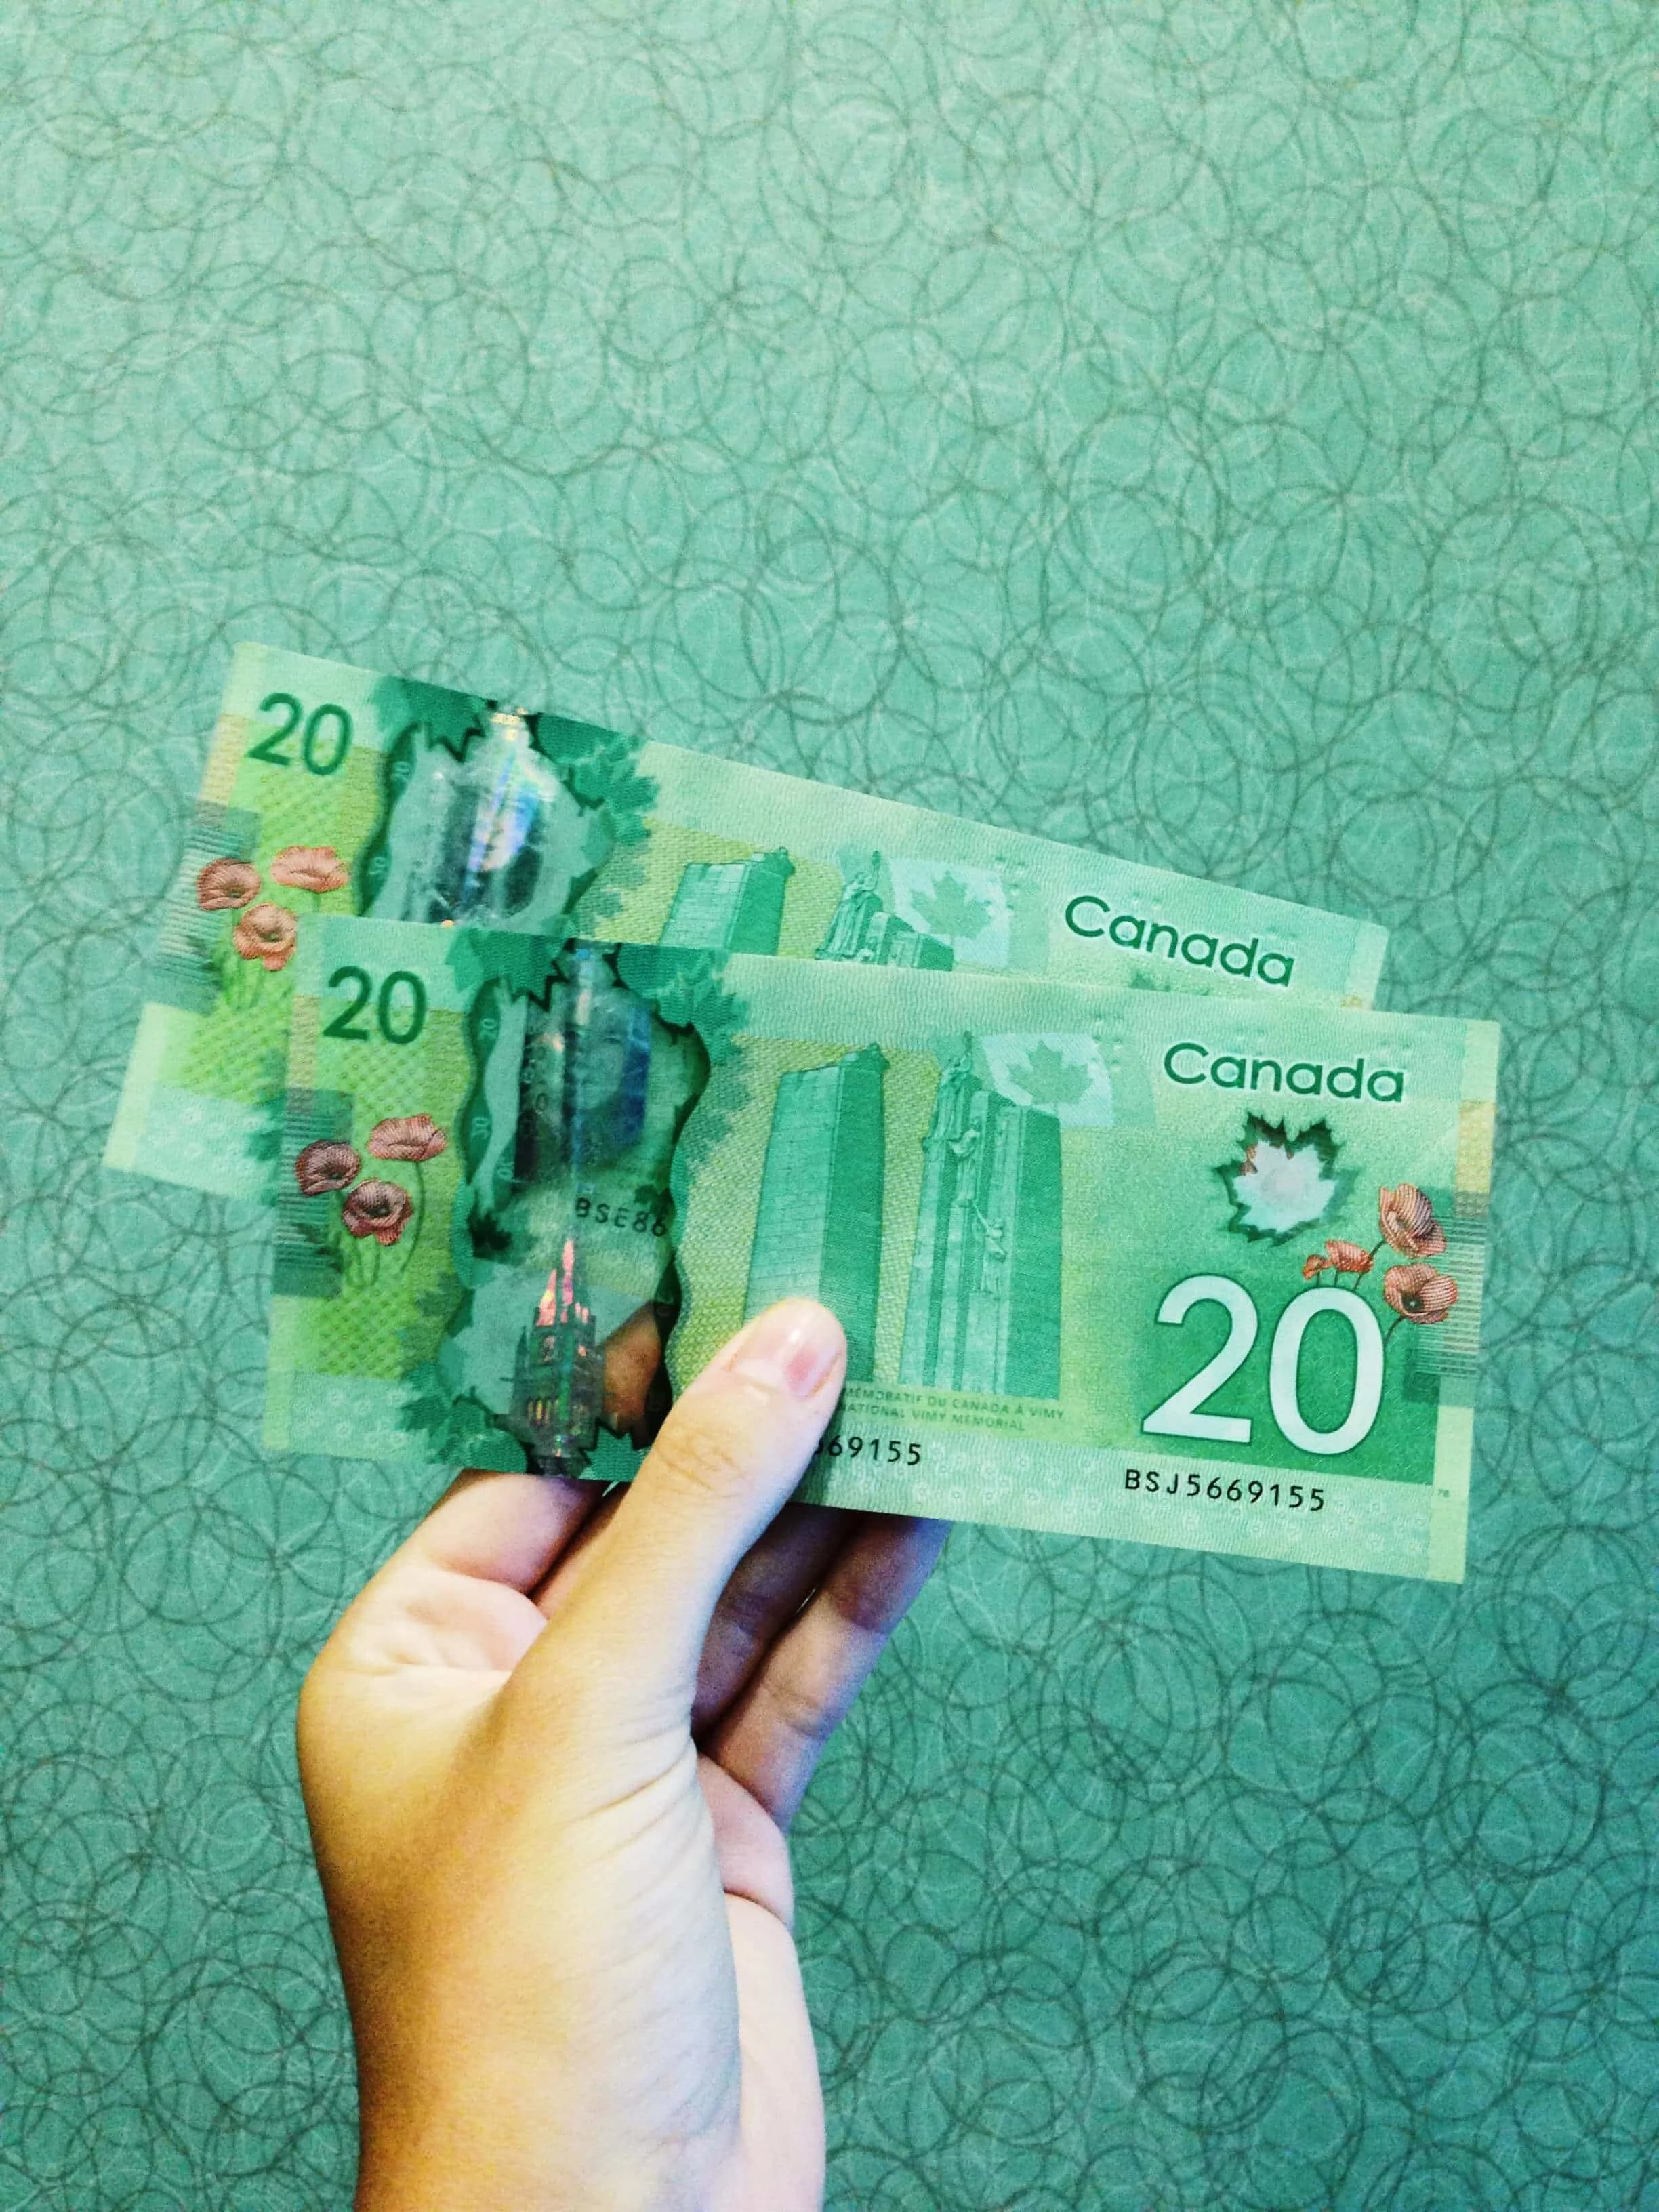 Some questions on the cheapest way to send money to Canada from abroad